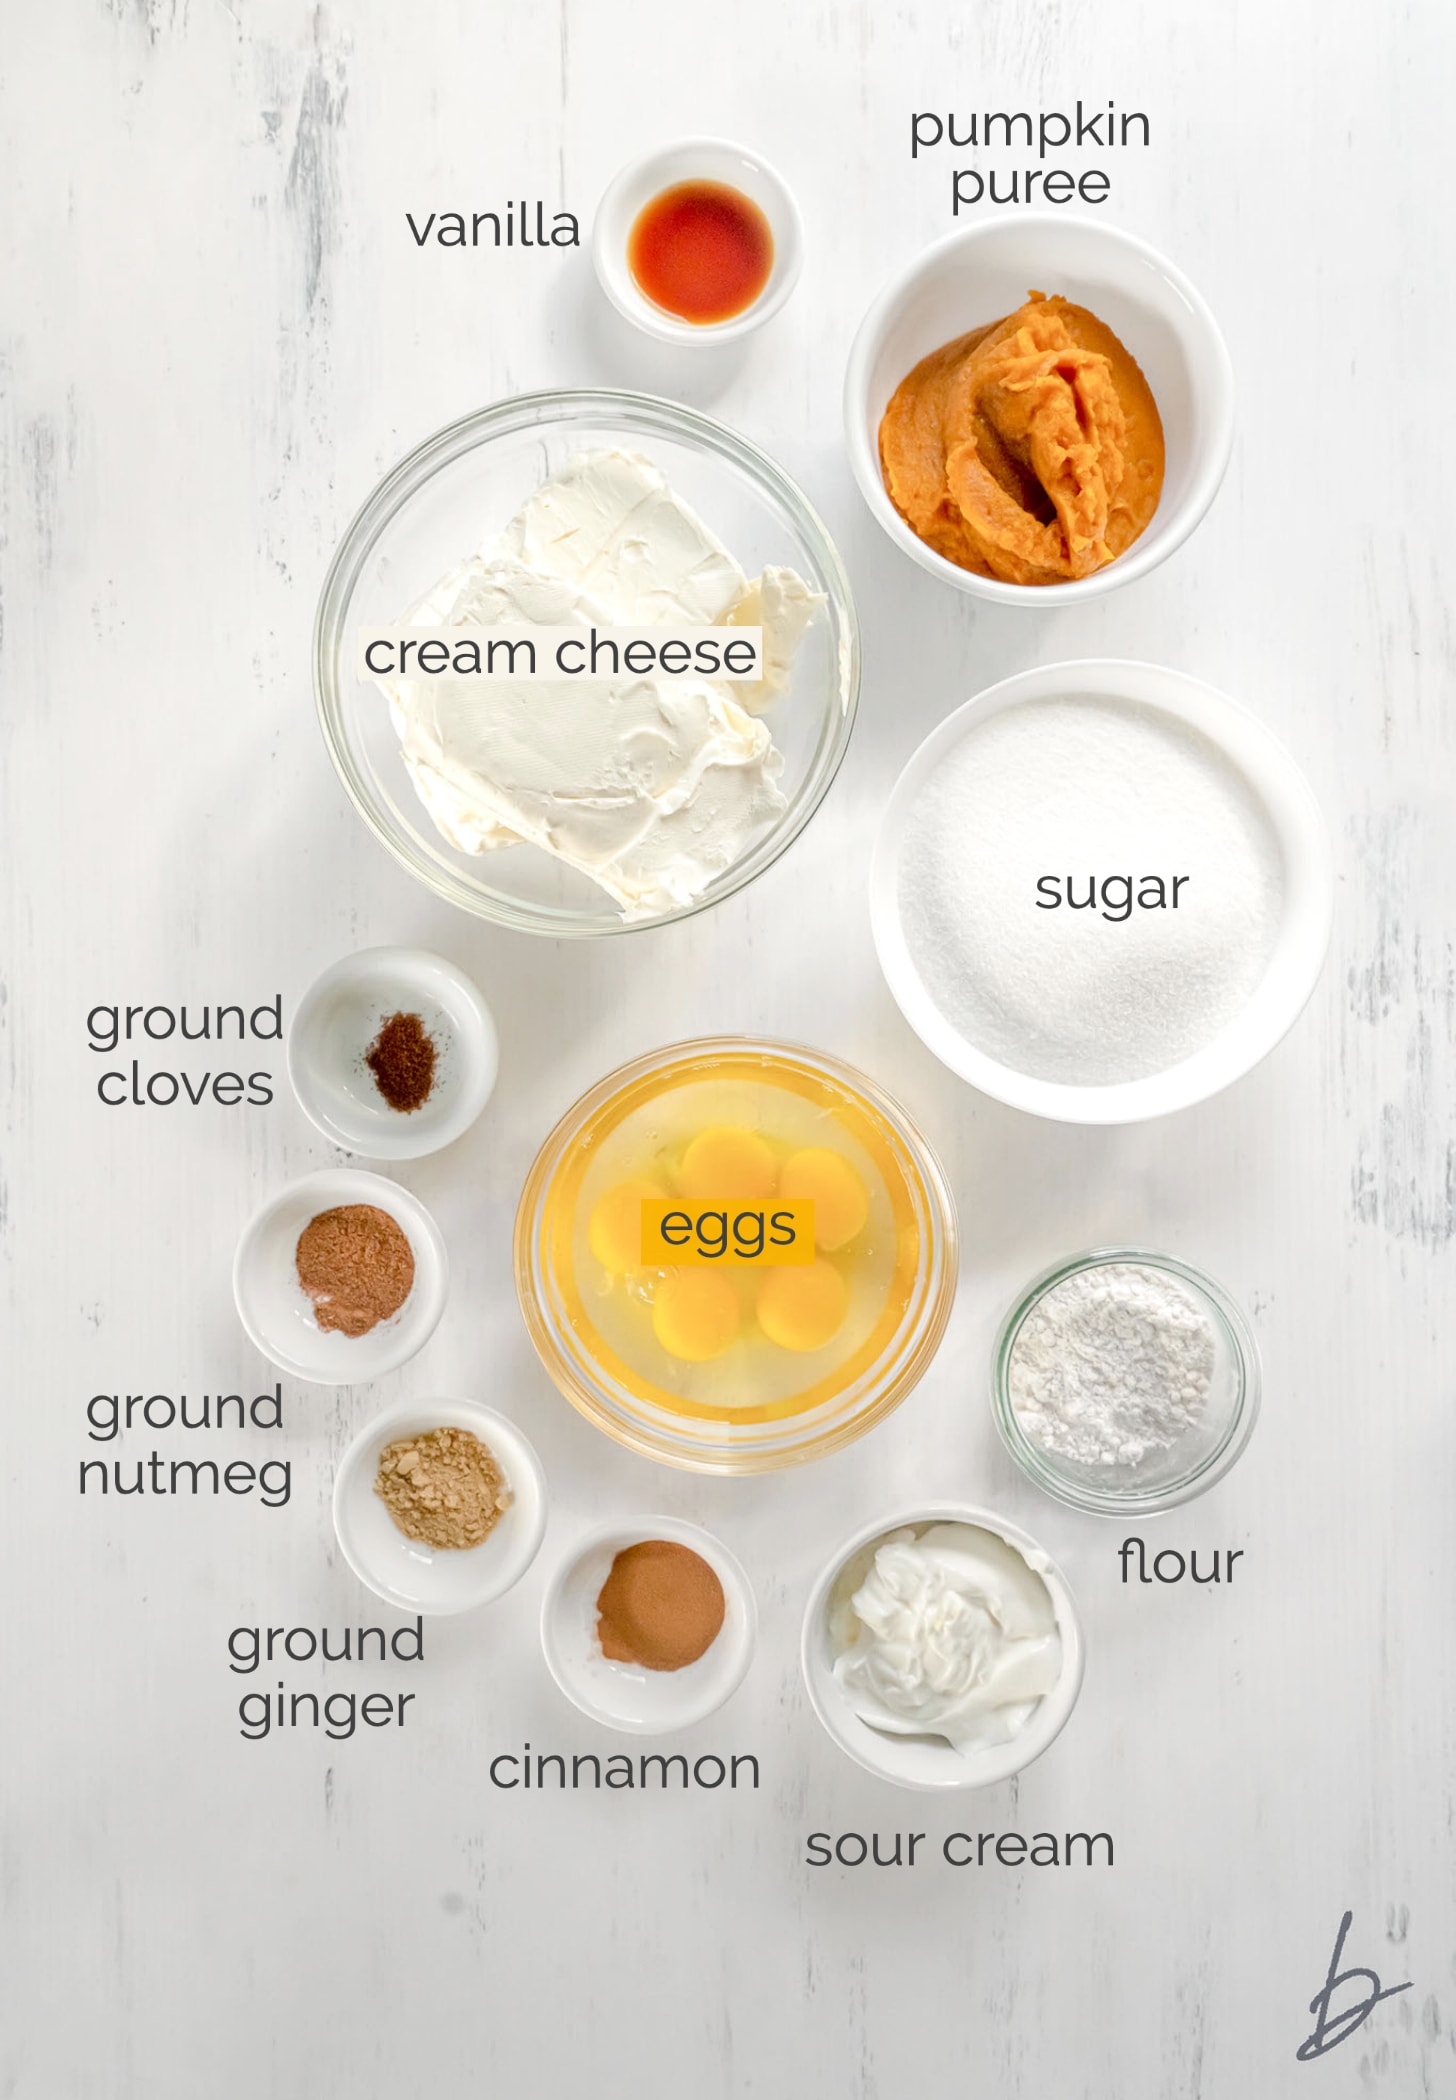 Pumpkin cheesecake ingredients in bowls labeled with text.